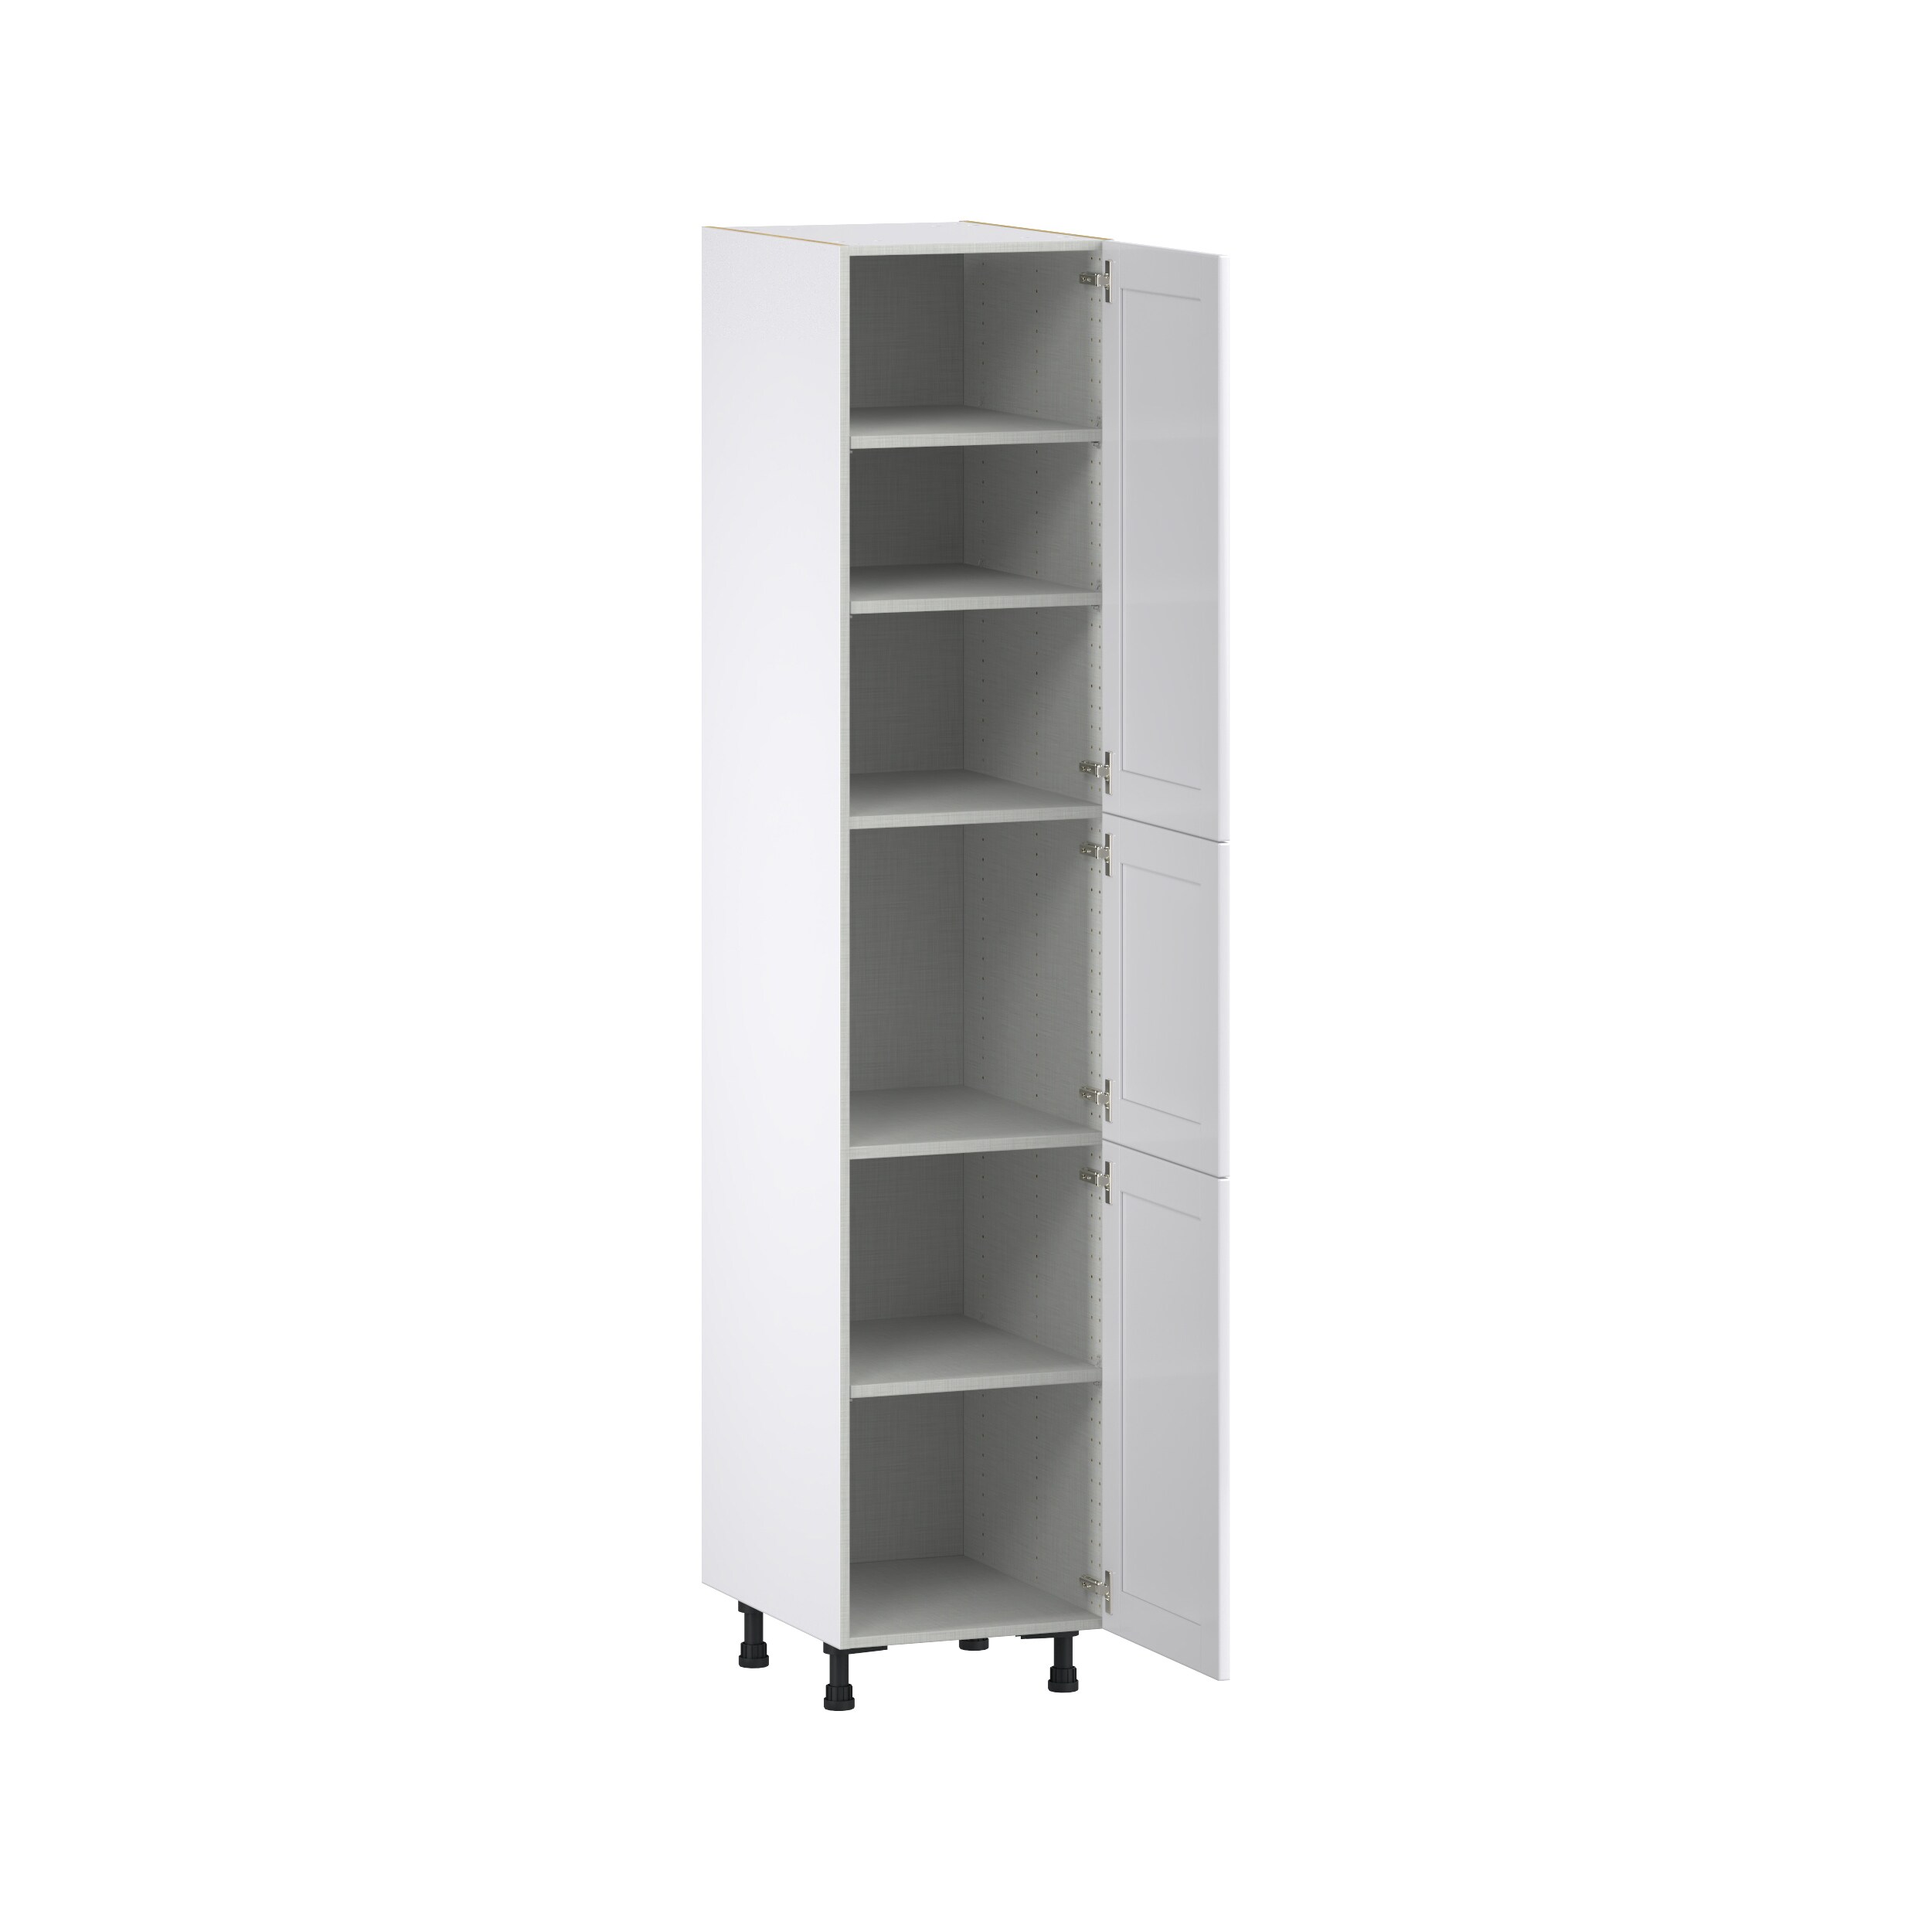 Hugo&Borg Rosemont 18-in W x 89.5-in H x 24-in D Glacier White Door Pantry  Fully Assembled Cabinet (Flat Panel Shaker Door Style) in the Kitchen  Cabinets department at